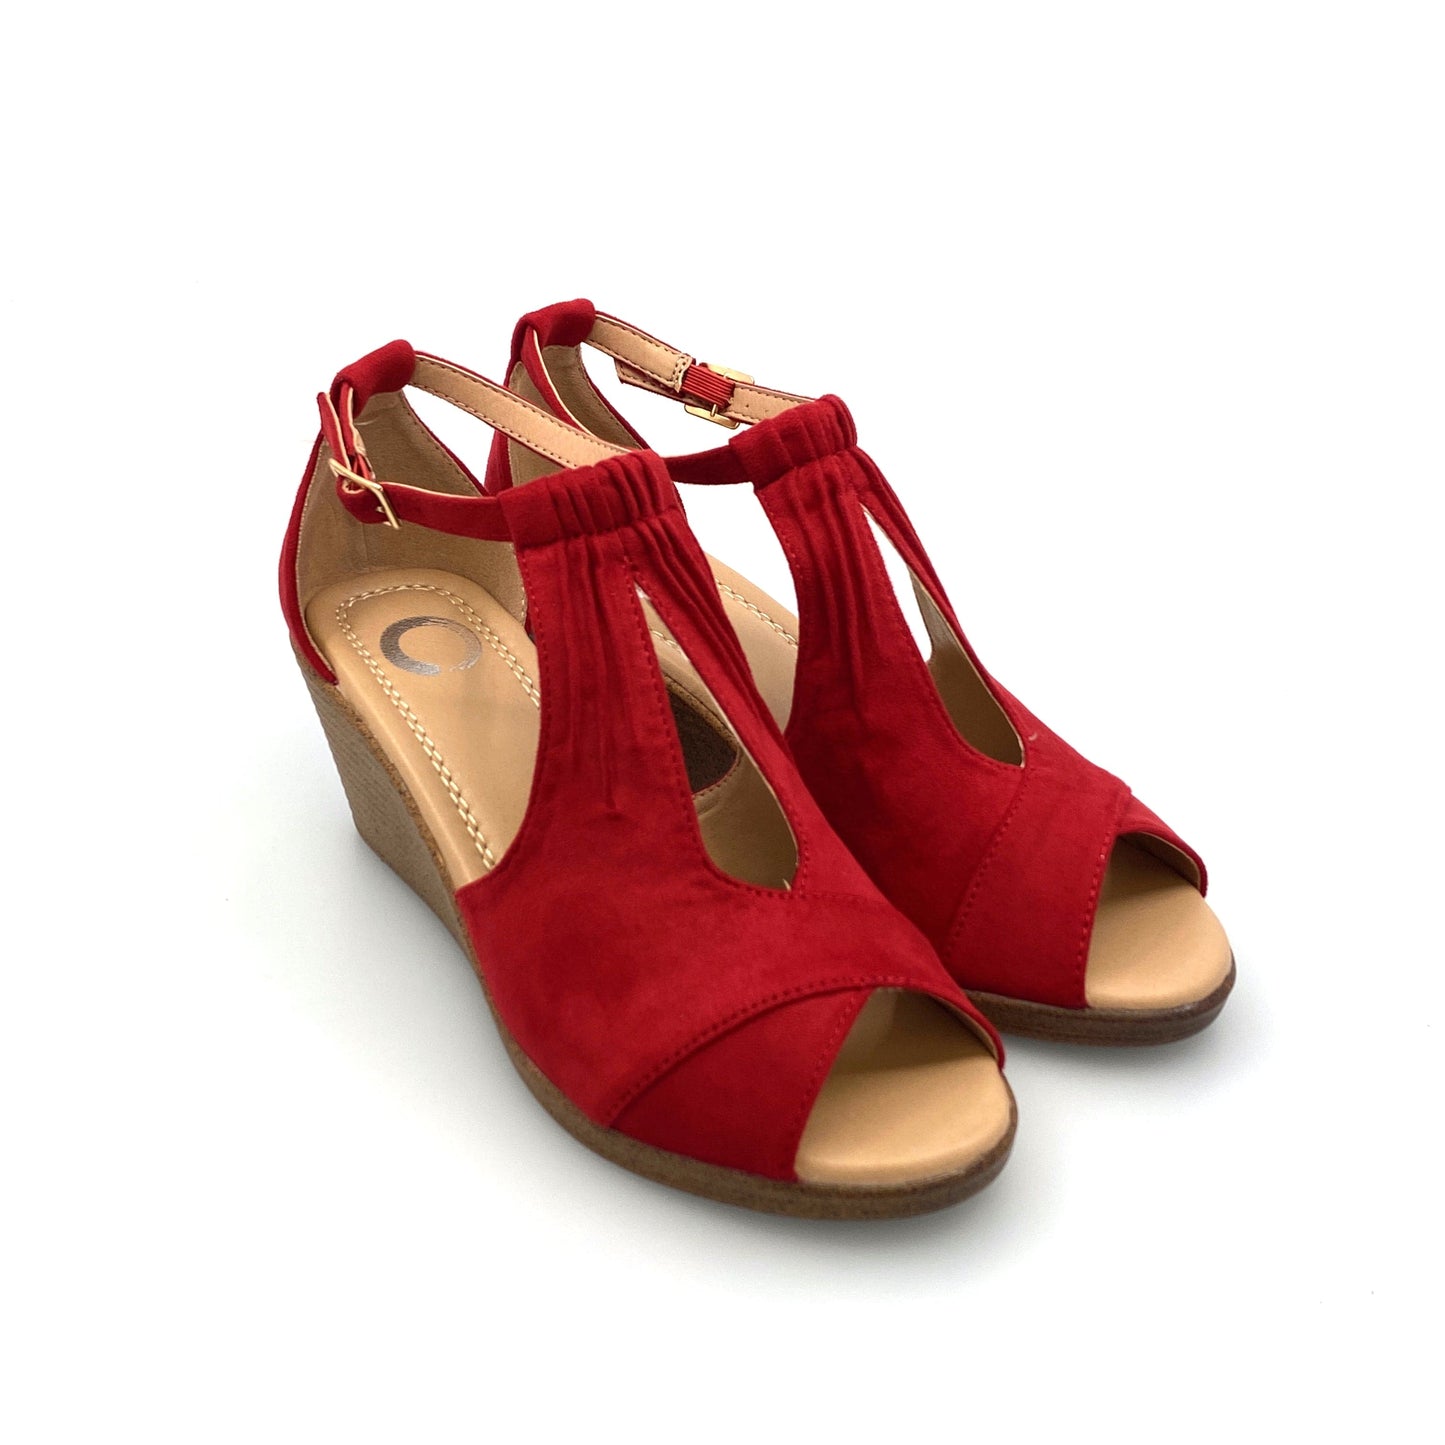 Journee Collection Womens Kedzie Wedge Sandals, Red, Size 7 Open Toe Shoes